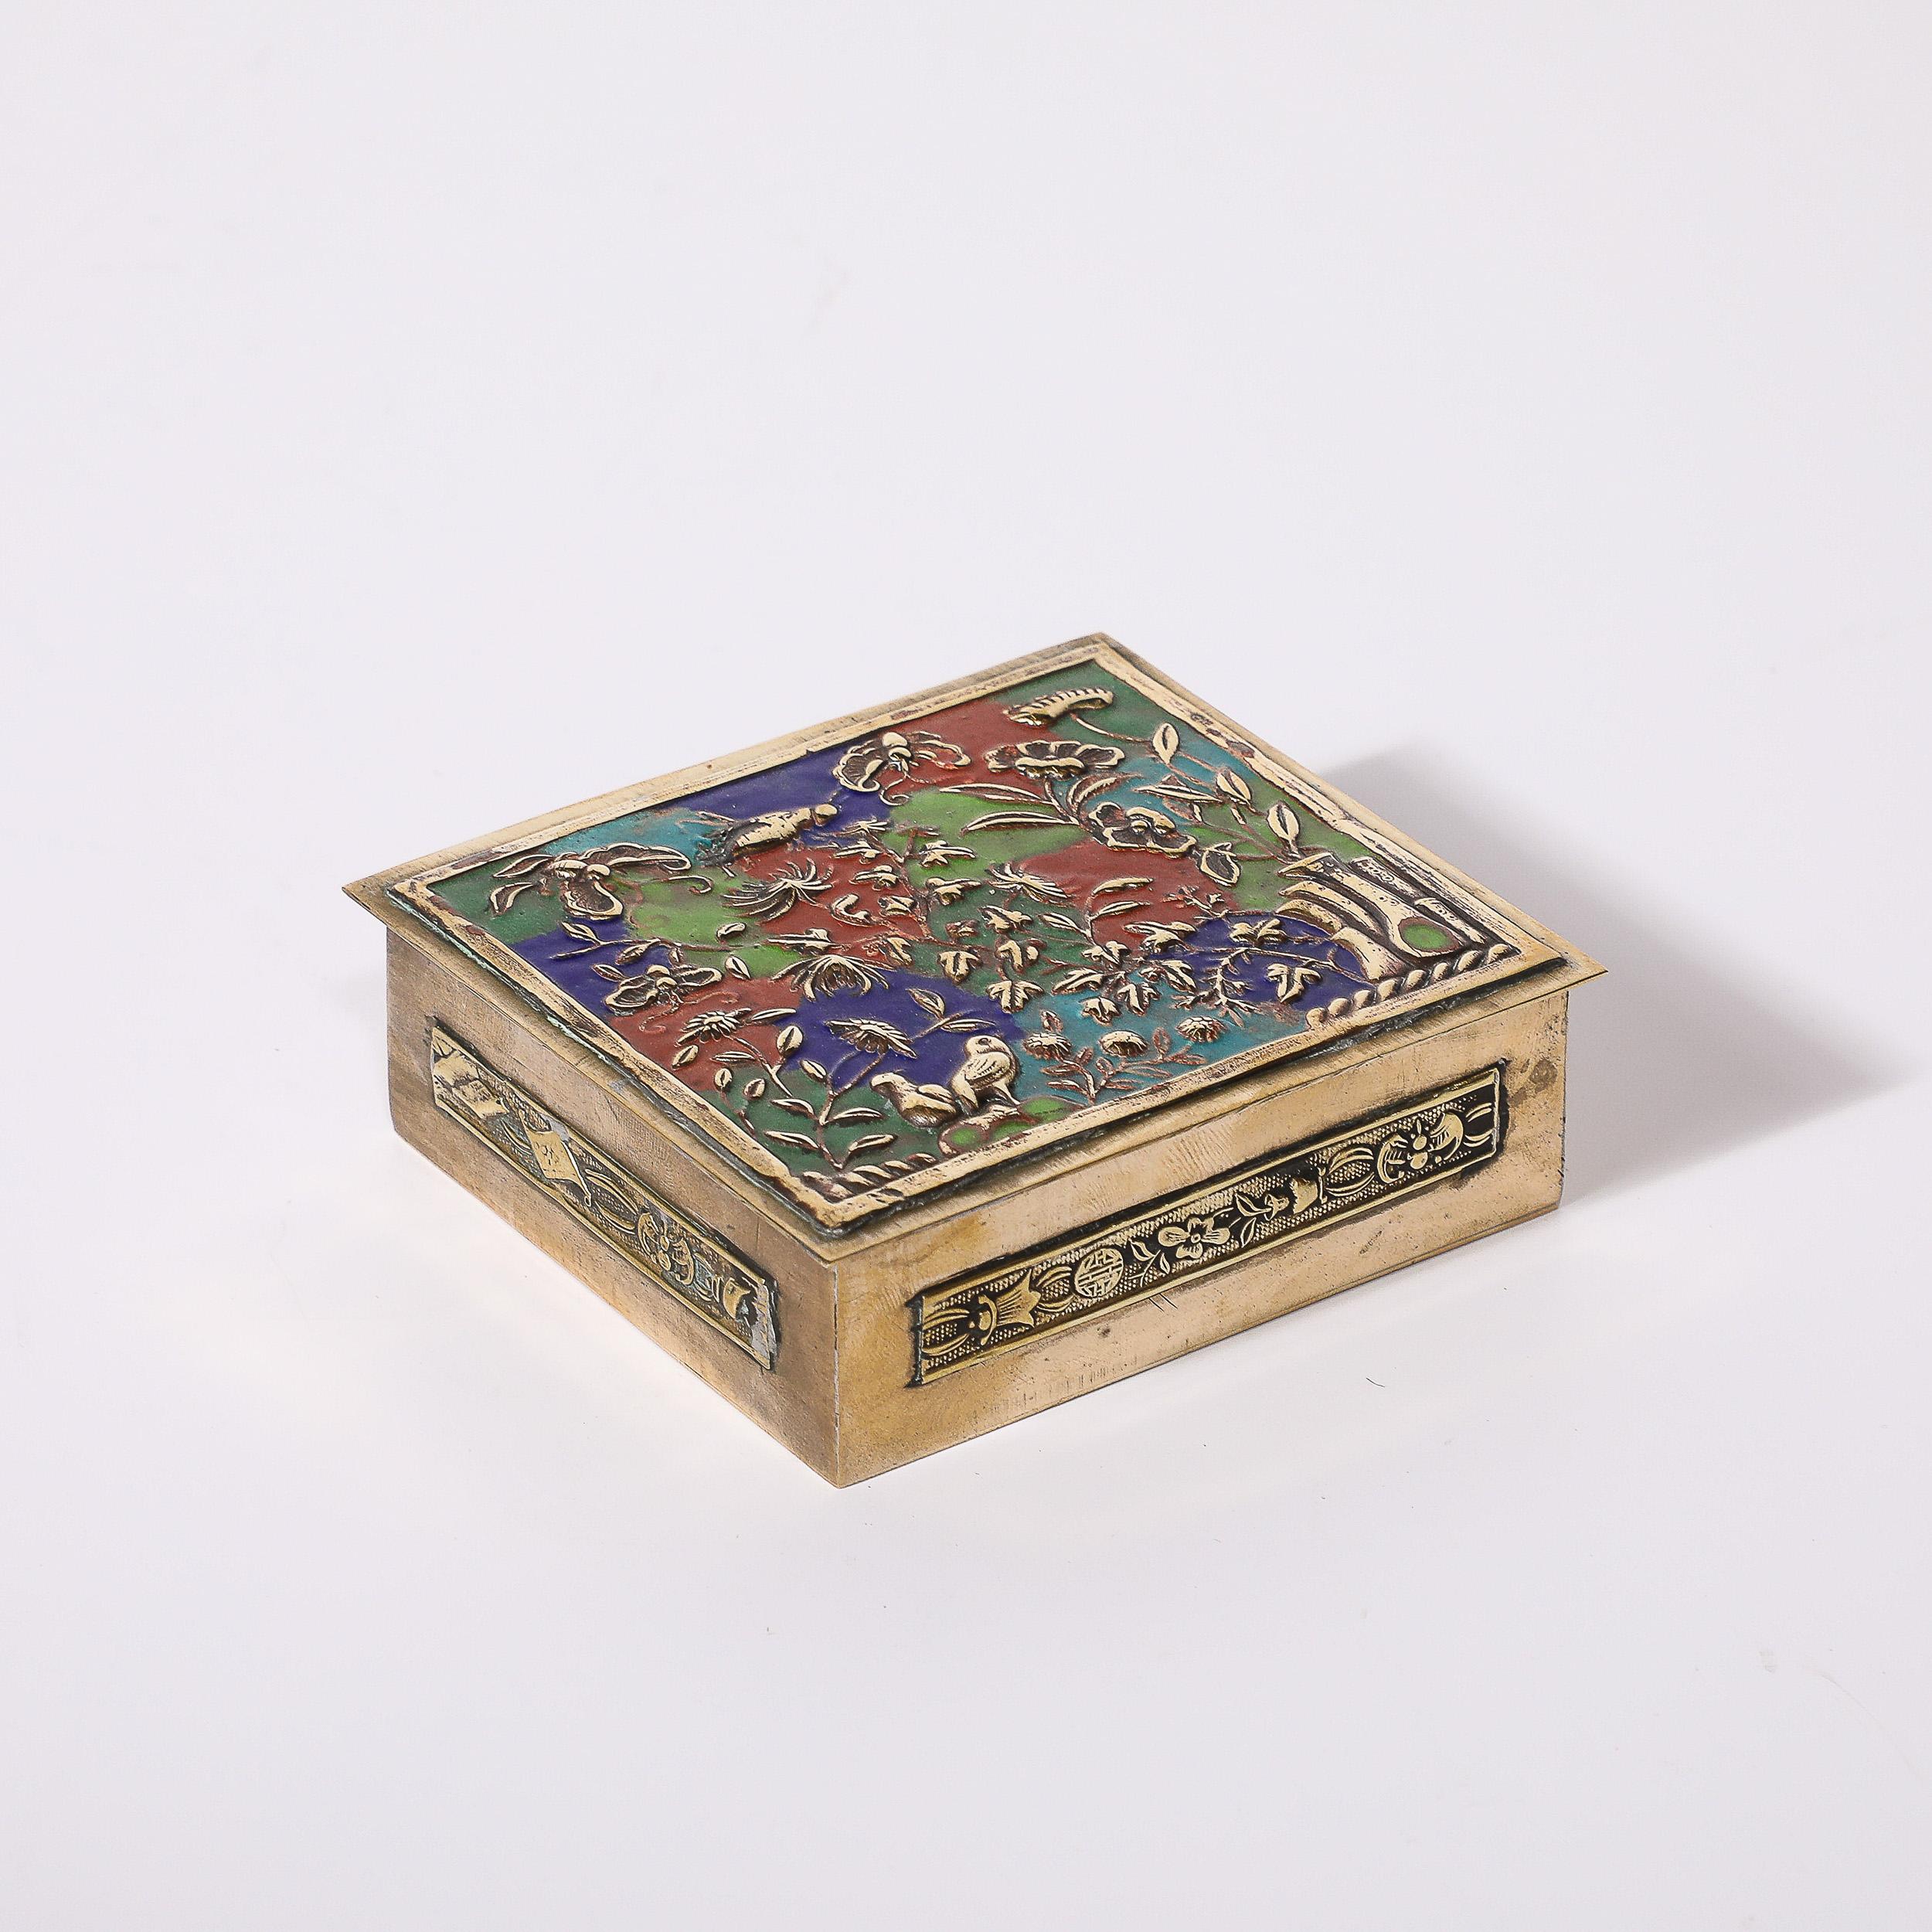 Mid-20th Century Art Deco Brass and Enamel Box W/ Naturalist Imagery in Relief Cloisonne For Sale